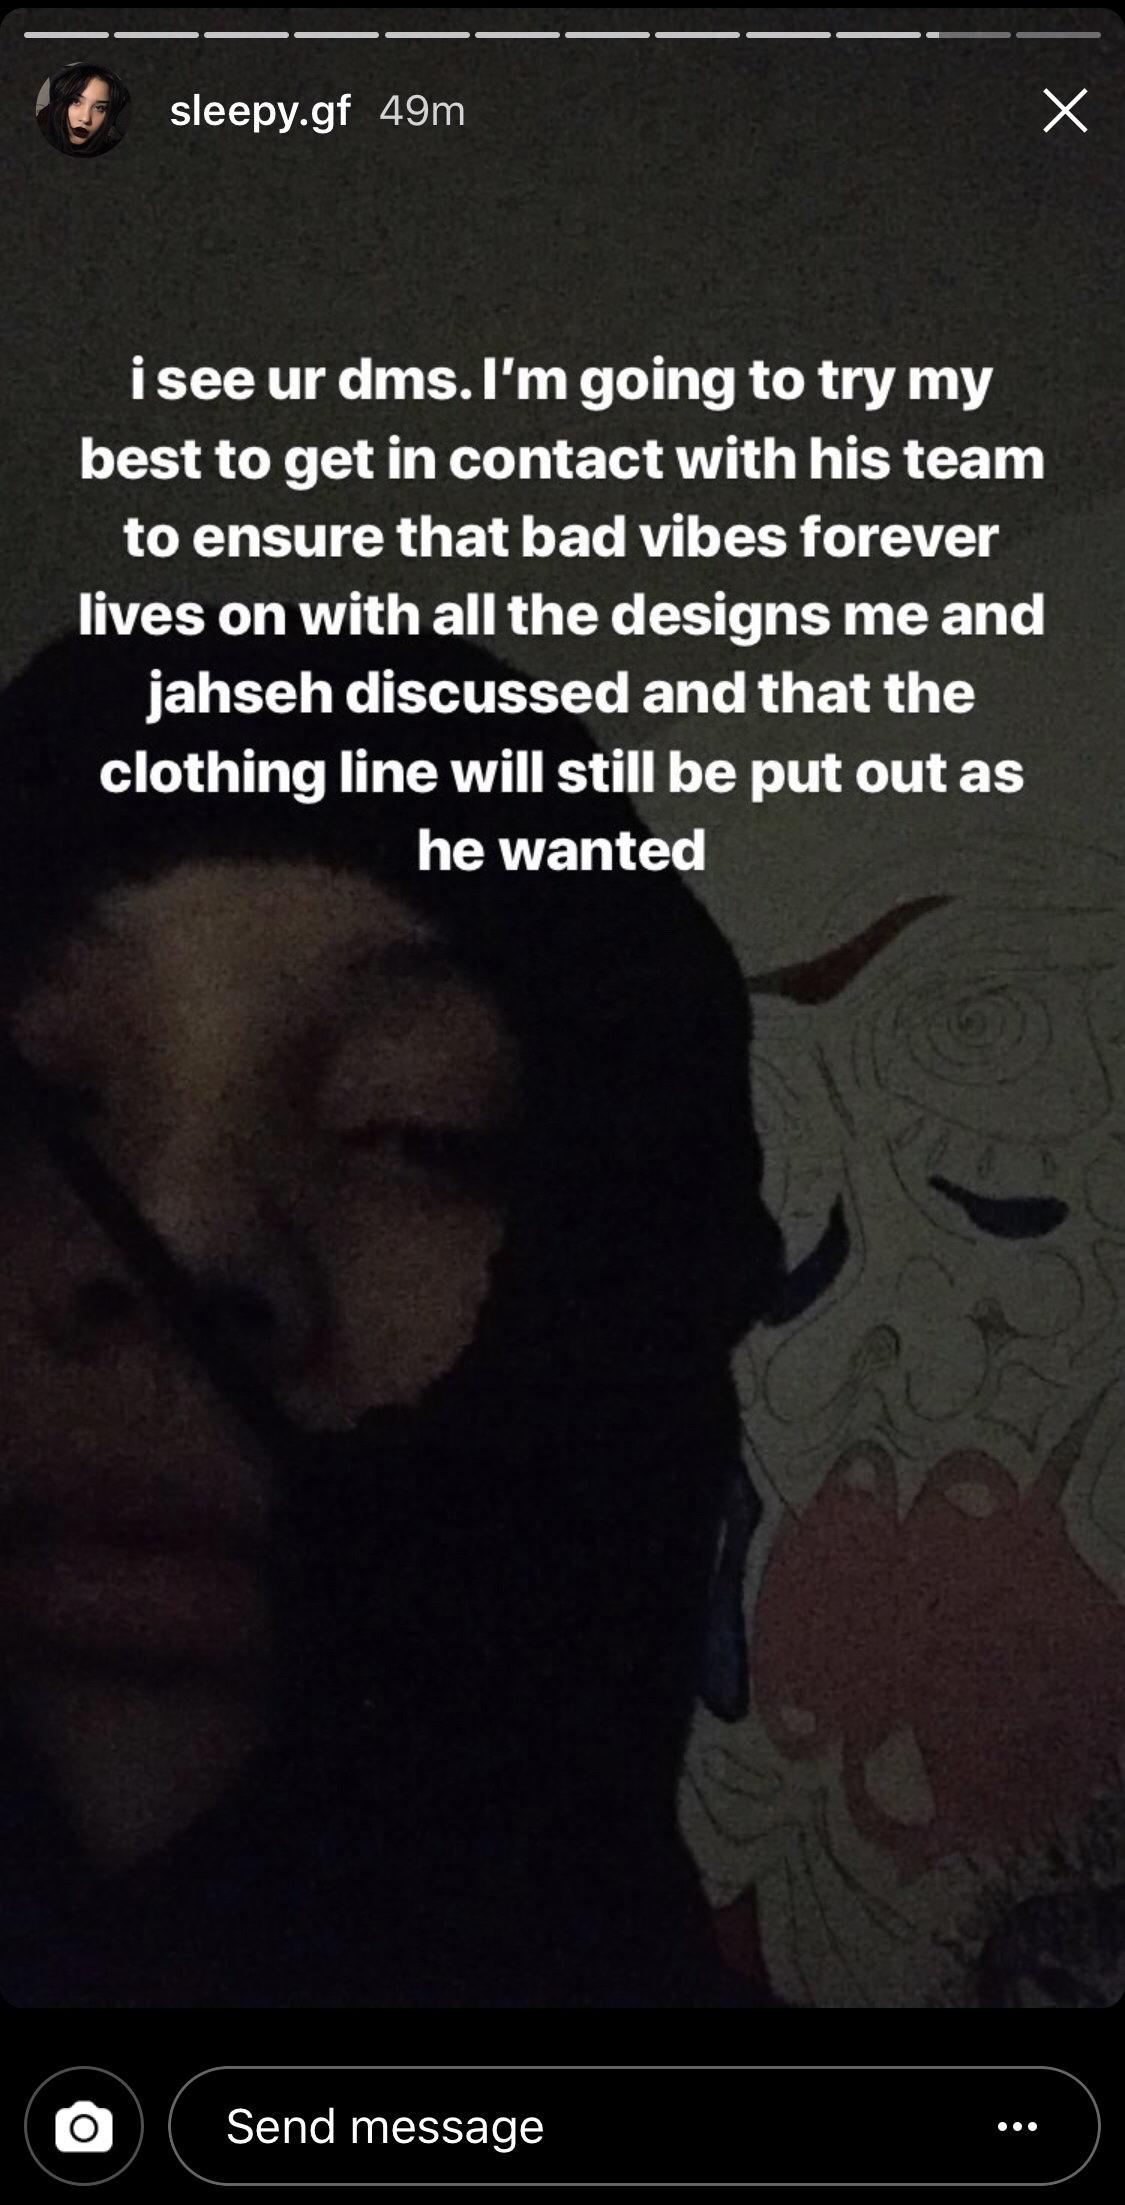 The Bad Vibes Forever clothing line could still release